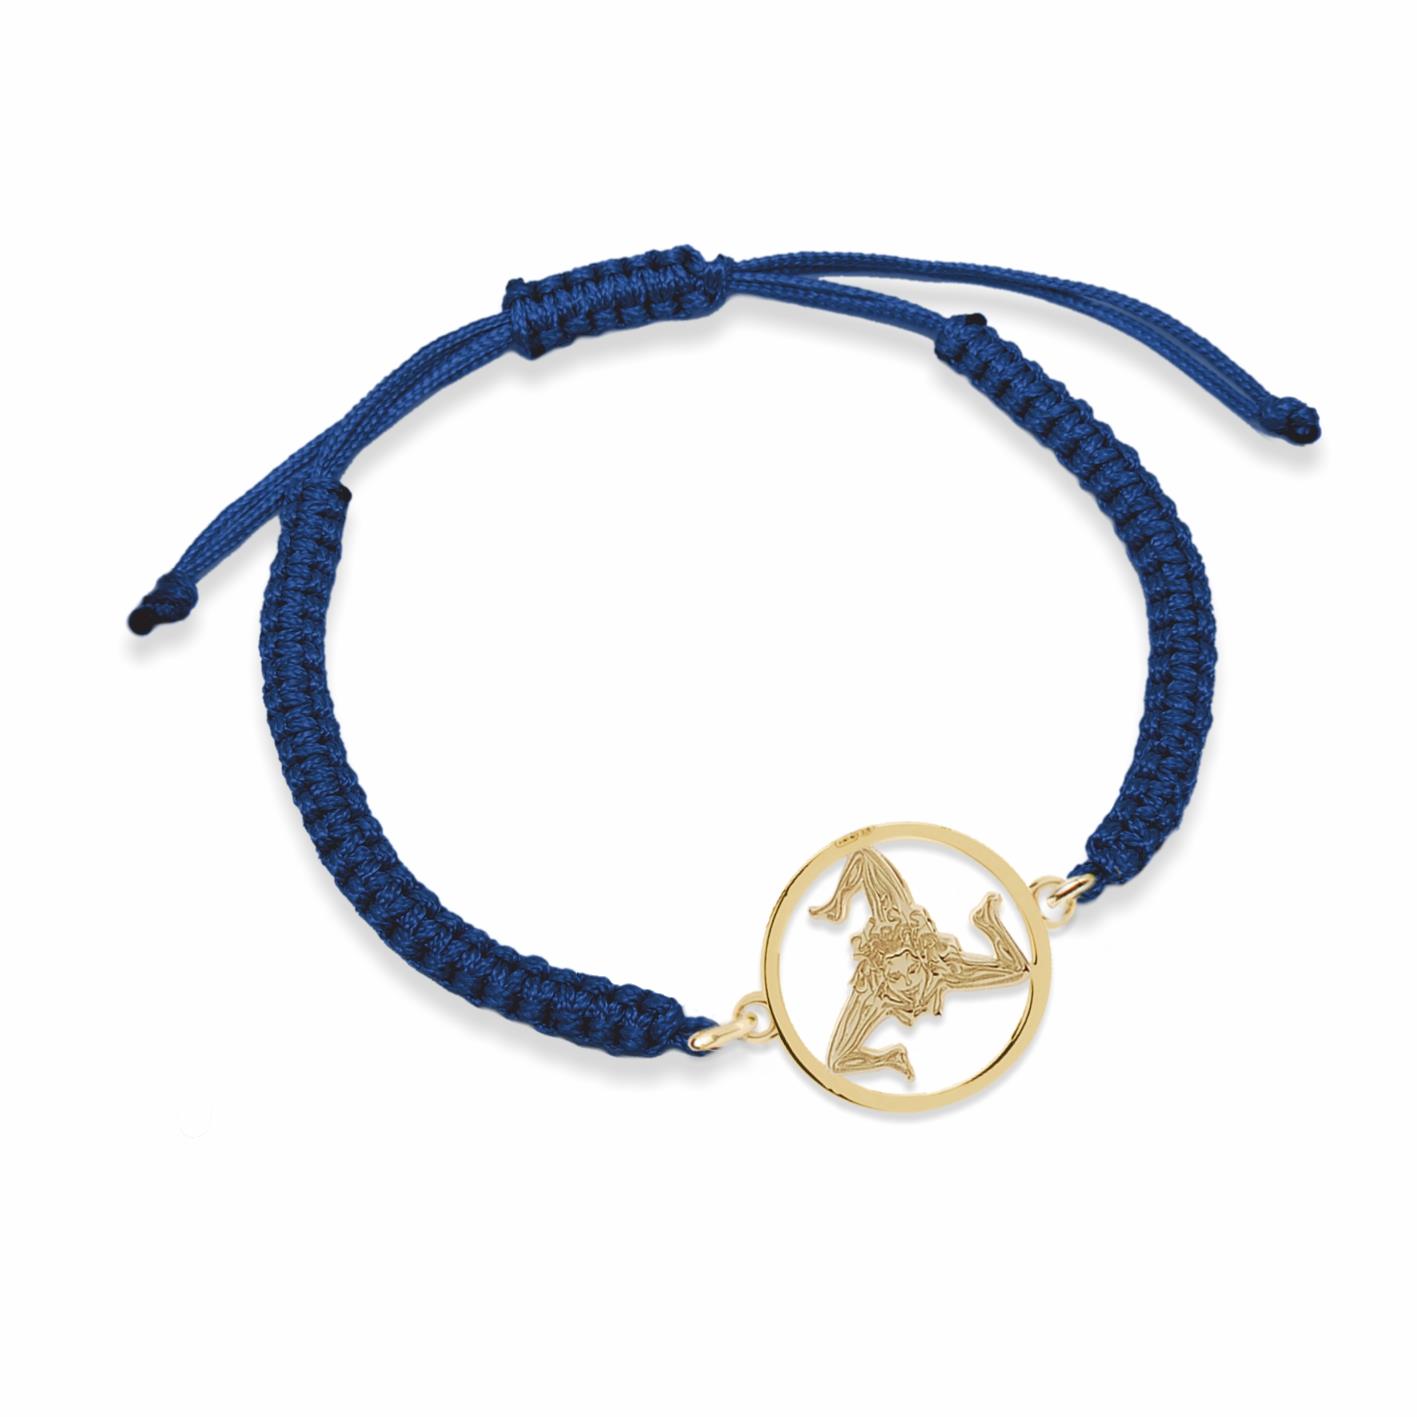 Blue nylon bracelet with the Trinacria symbol enclosed in the golden silver circle - MY SICILY